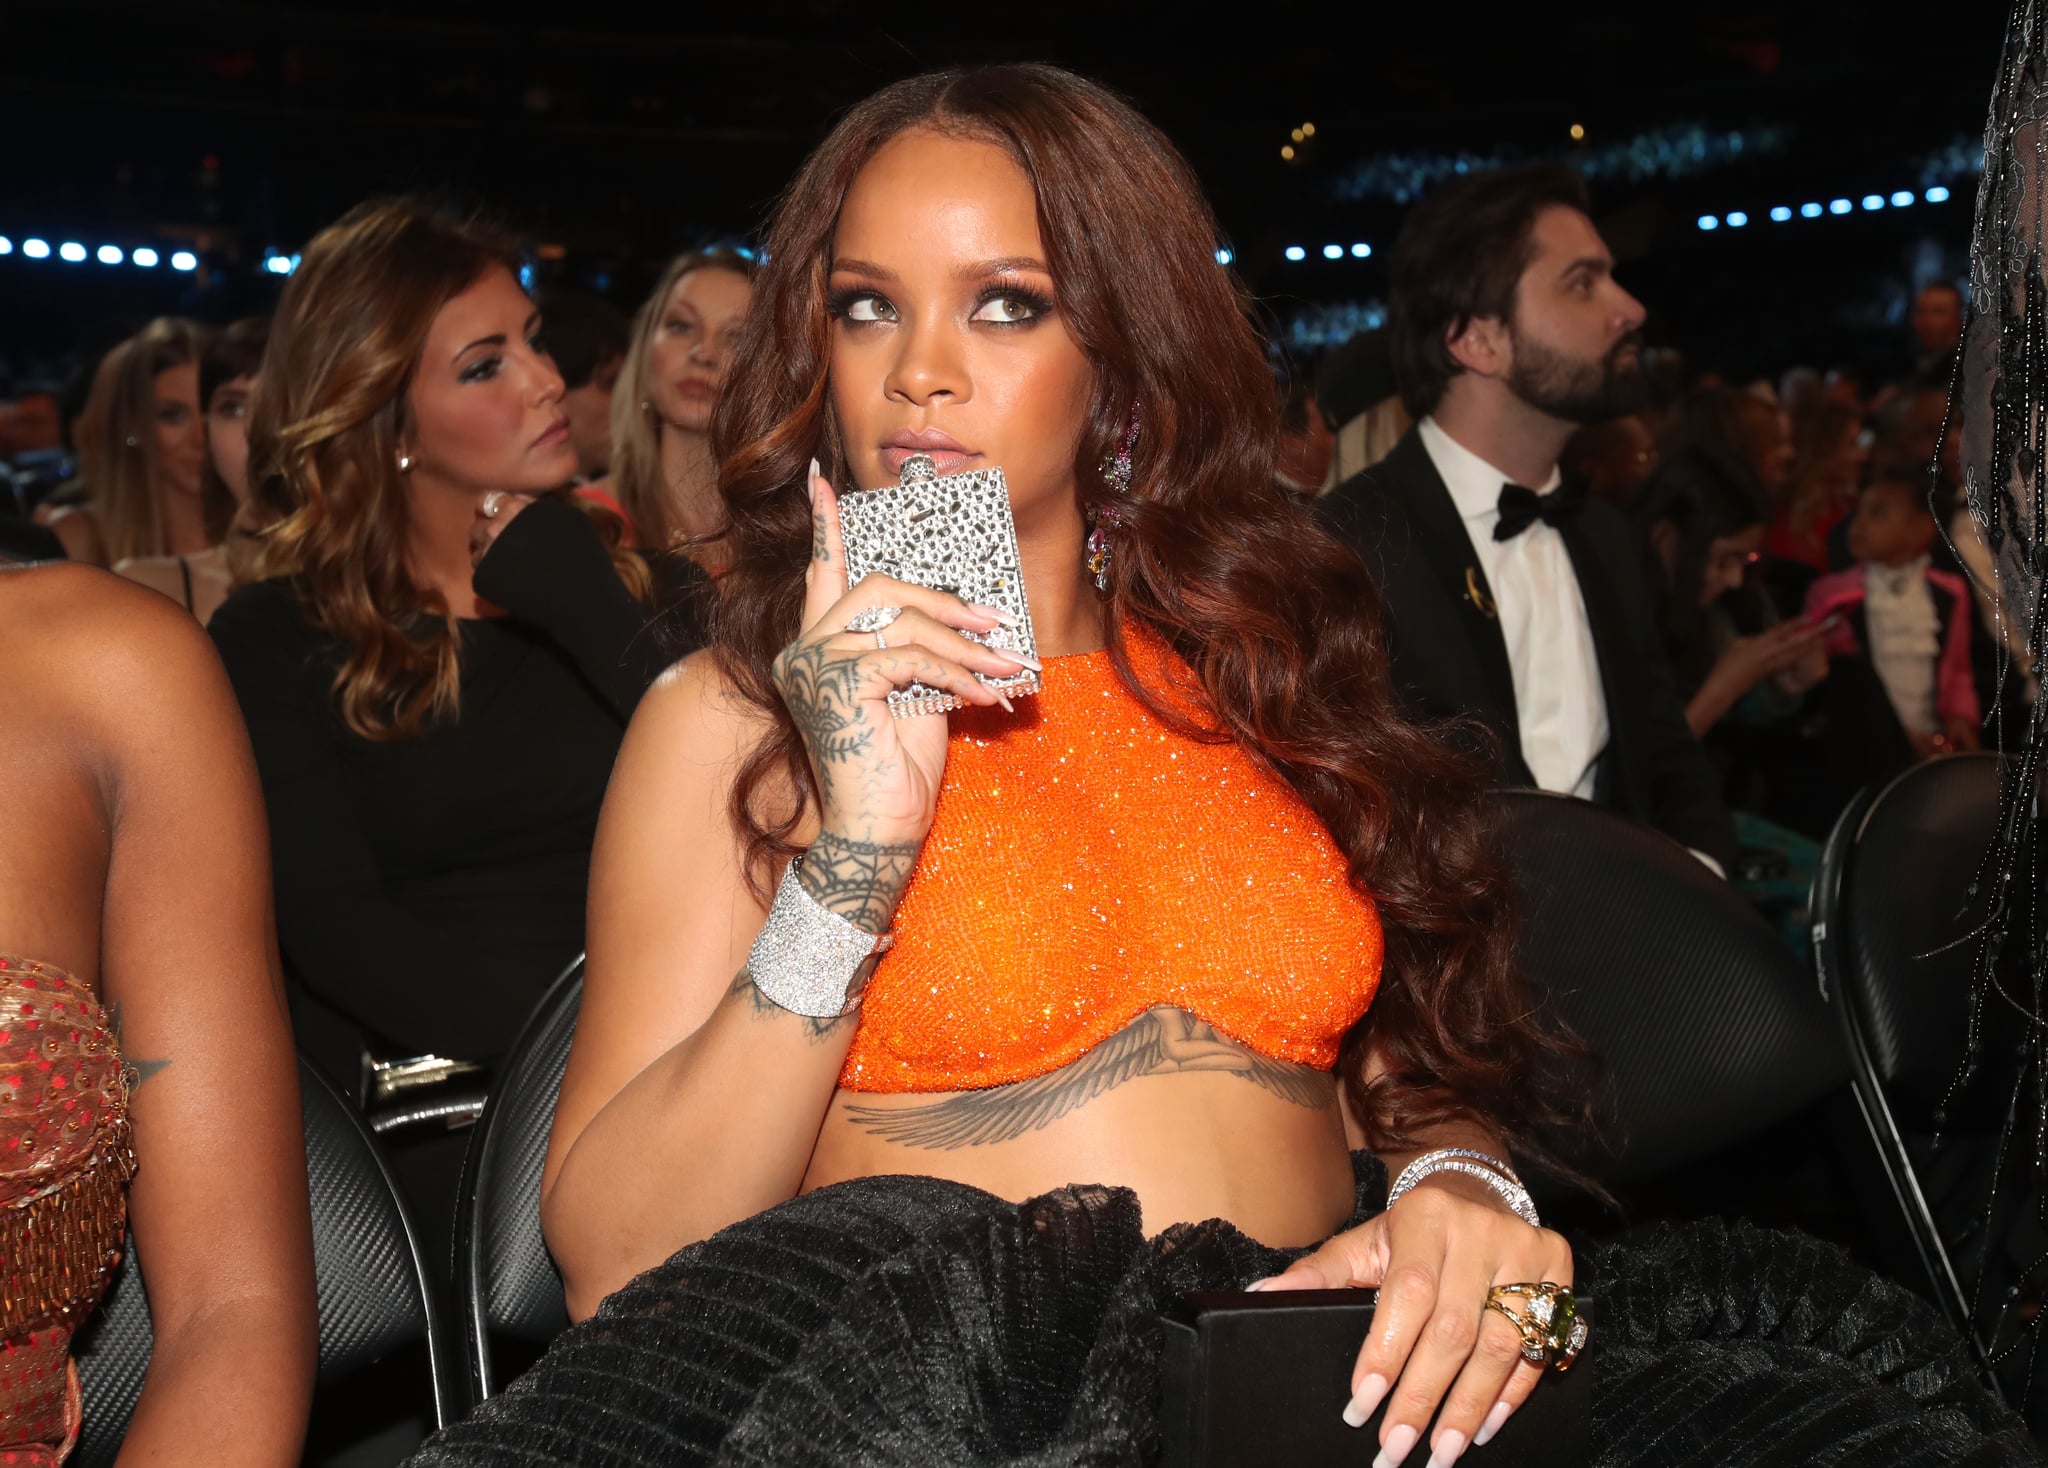 Rihanna sipped from a flask during the 2017 show.